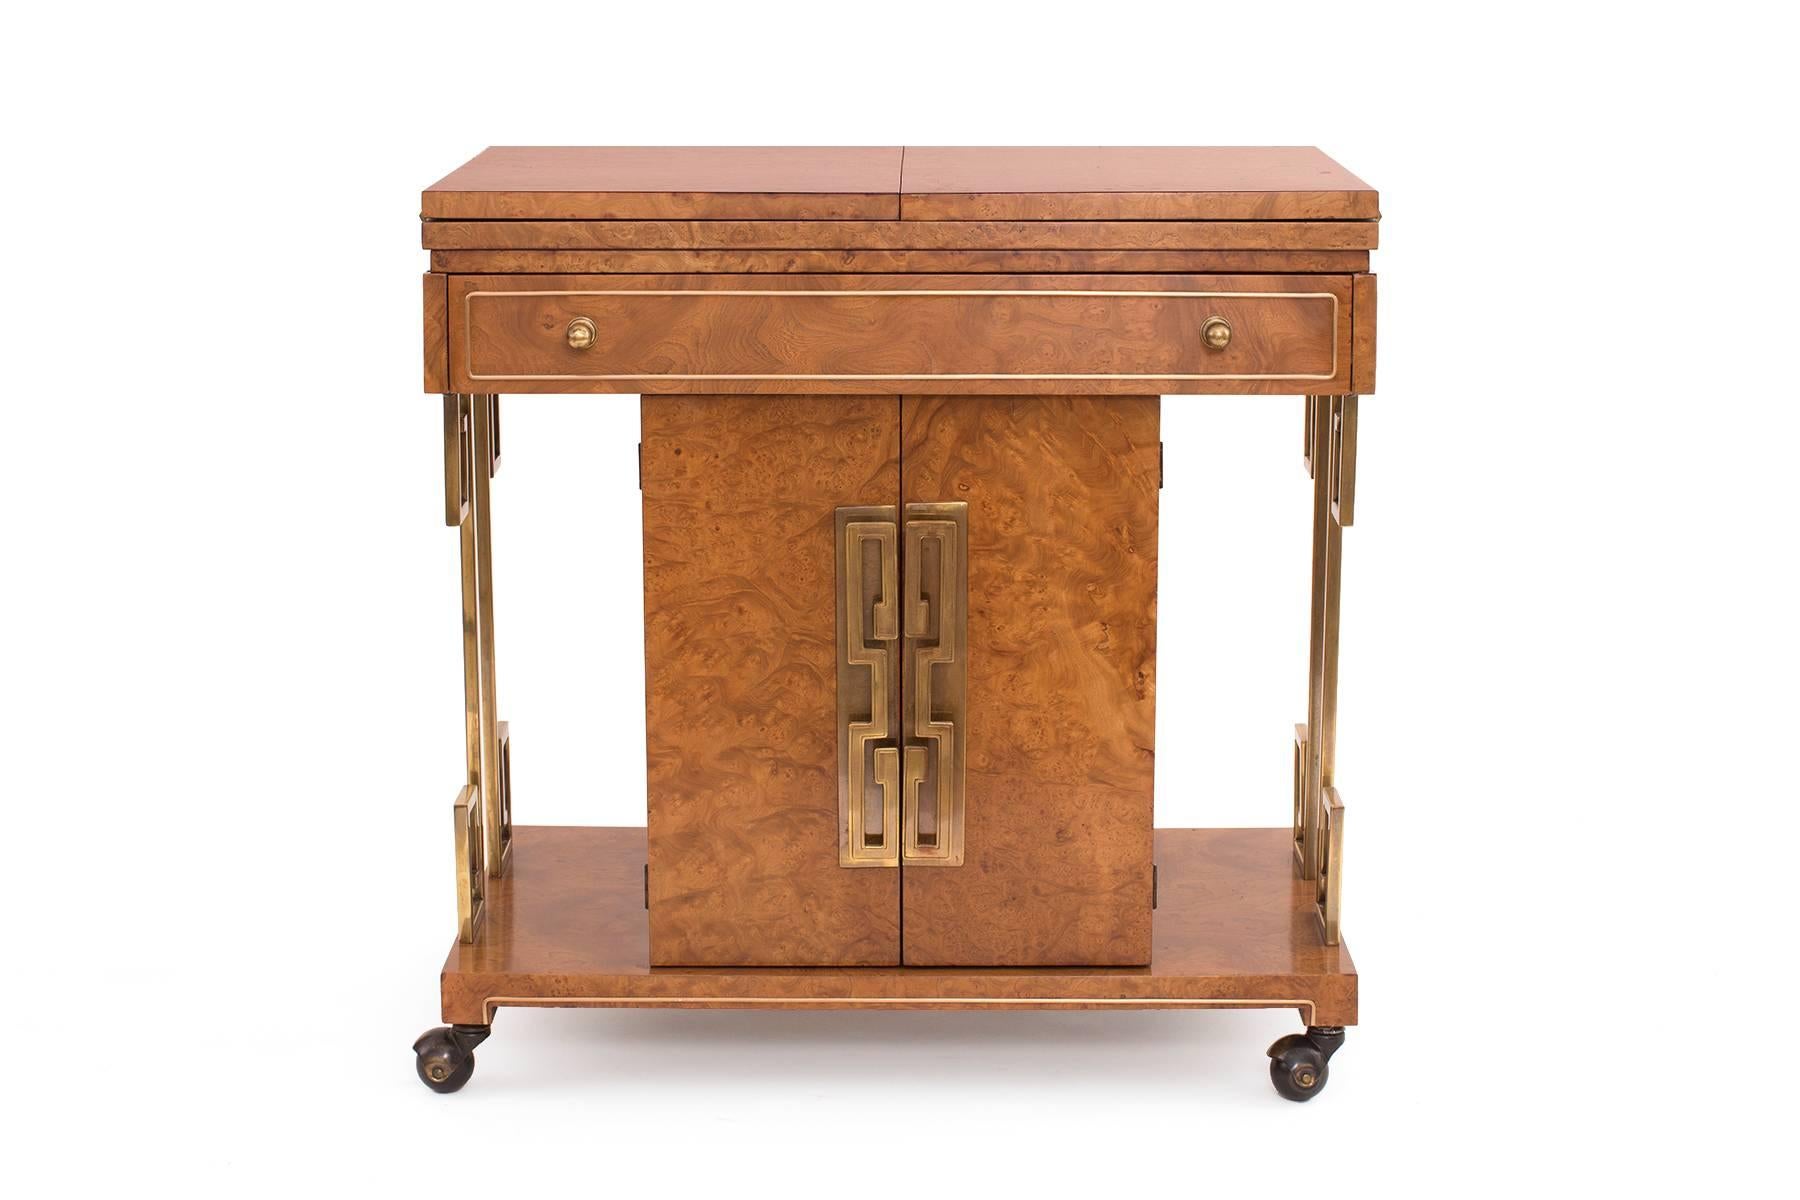 Stunning brass and burl barcart by Mastercraft, circa early 1960s. This example has patinated brass greek key door pulls and accents. The fabulous burl wood case has been newly finished. Top is expandable.